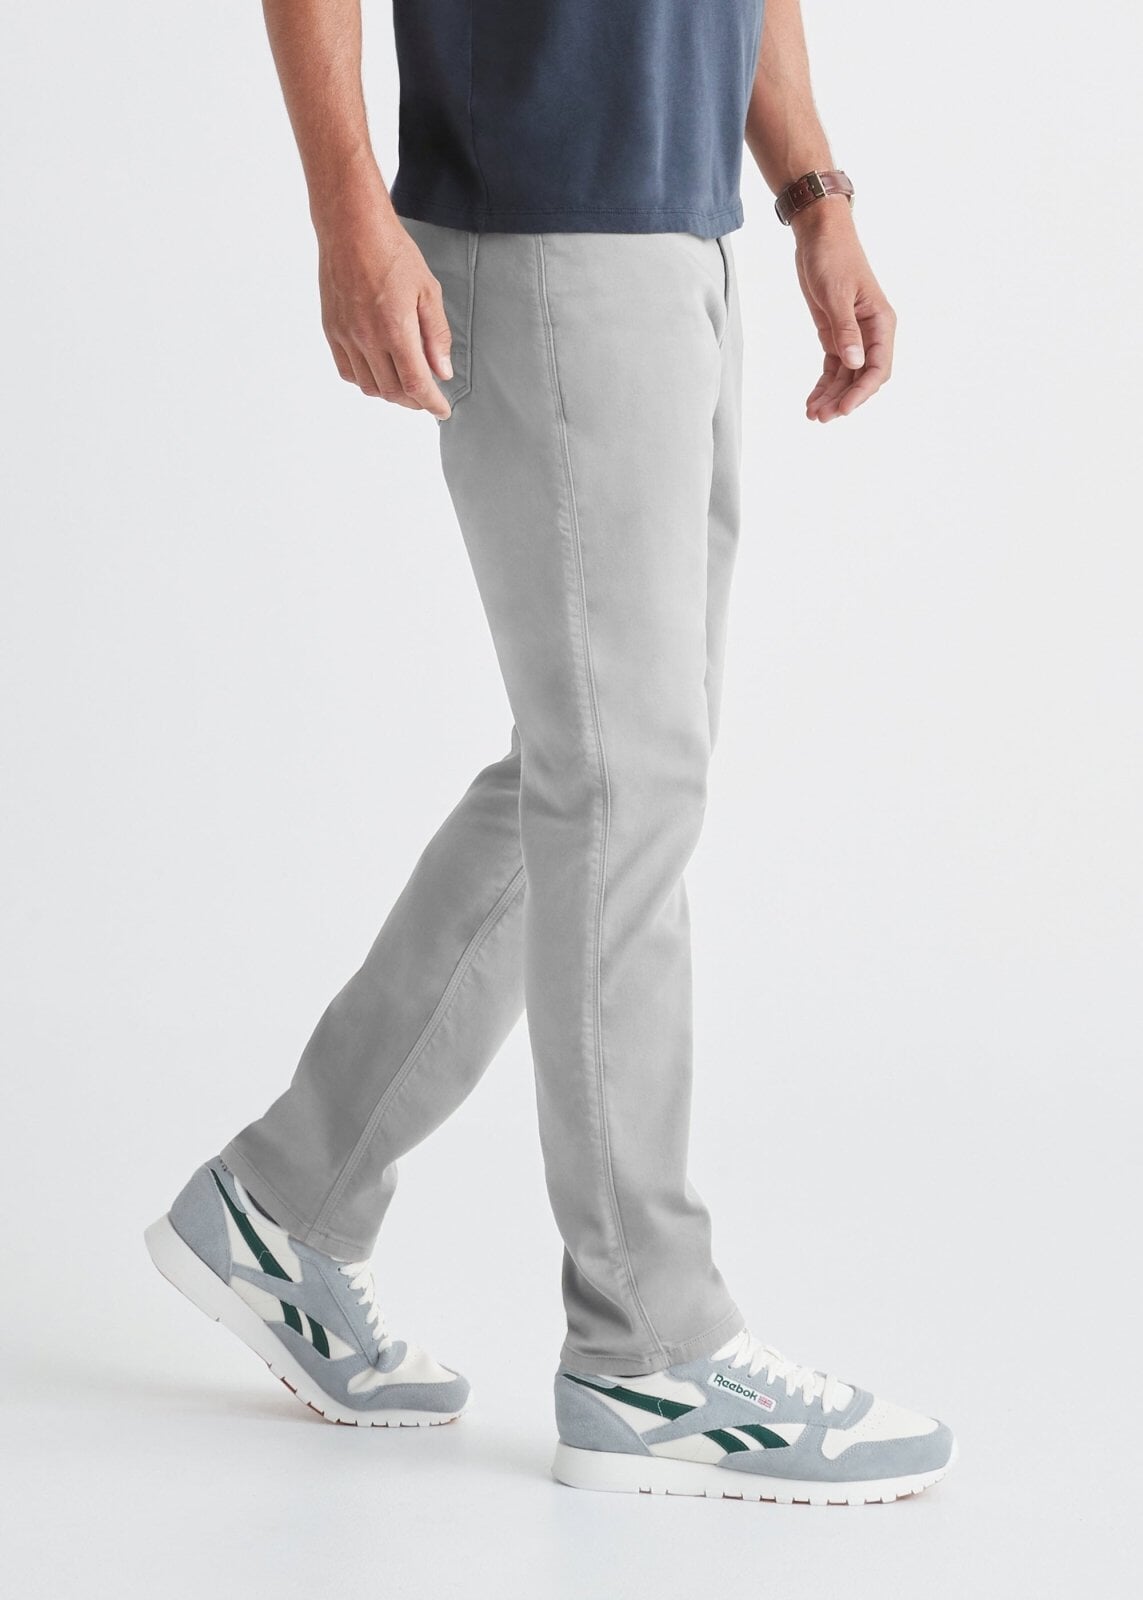 mens light grey relaxed fit dress sweatpant side